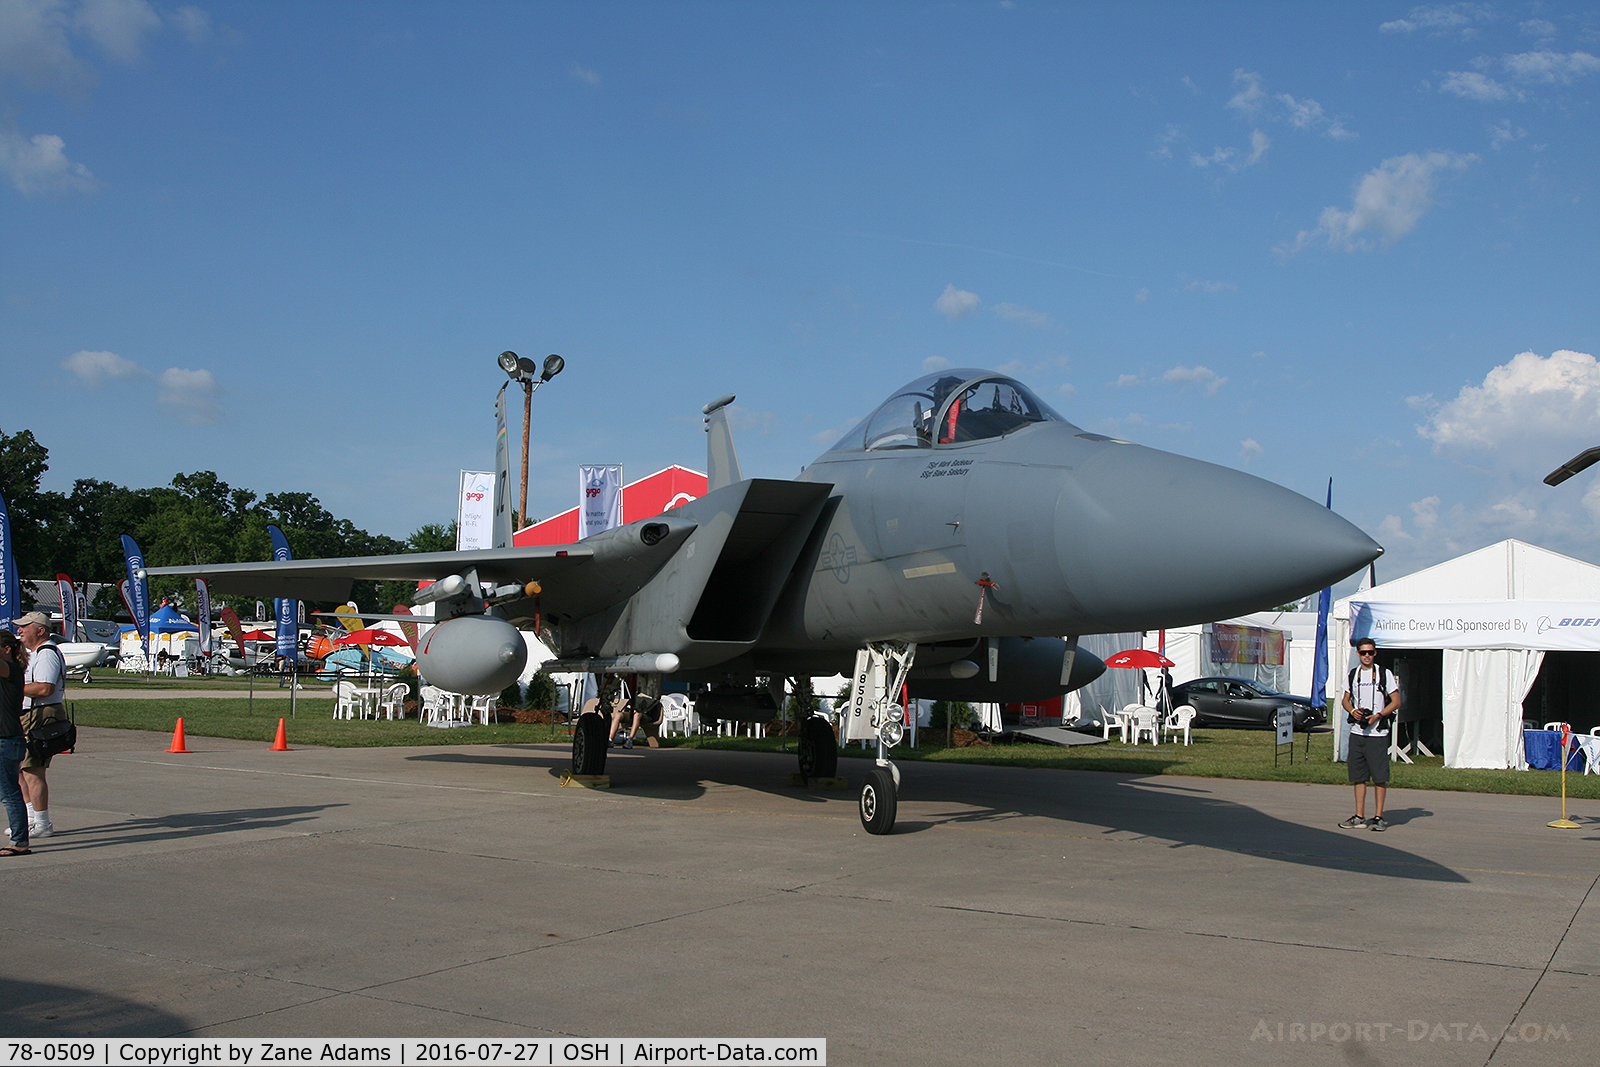 78-0509, 1978 McDonnell Douglas F-15C Eagle C/N 0494/C042, At the 2016 EAA AirVenture - Oshkosh, Wisconsin